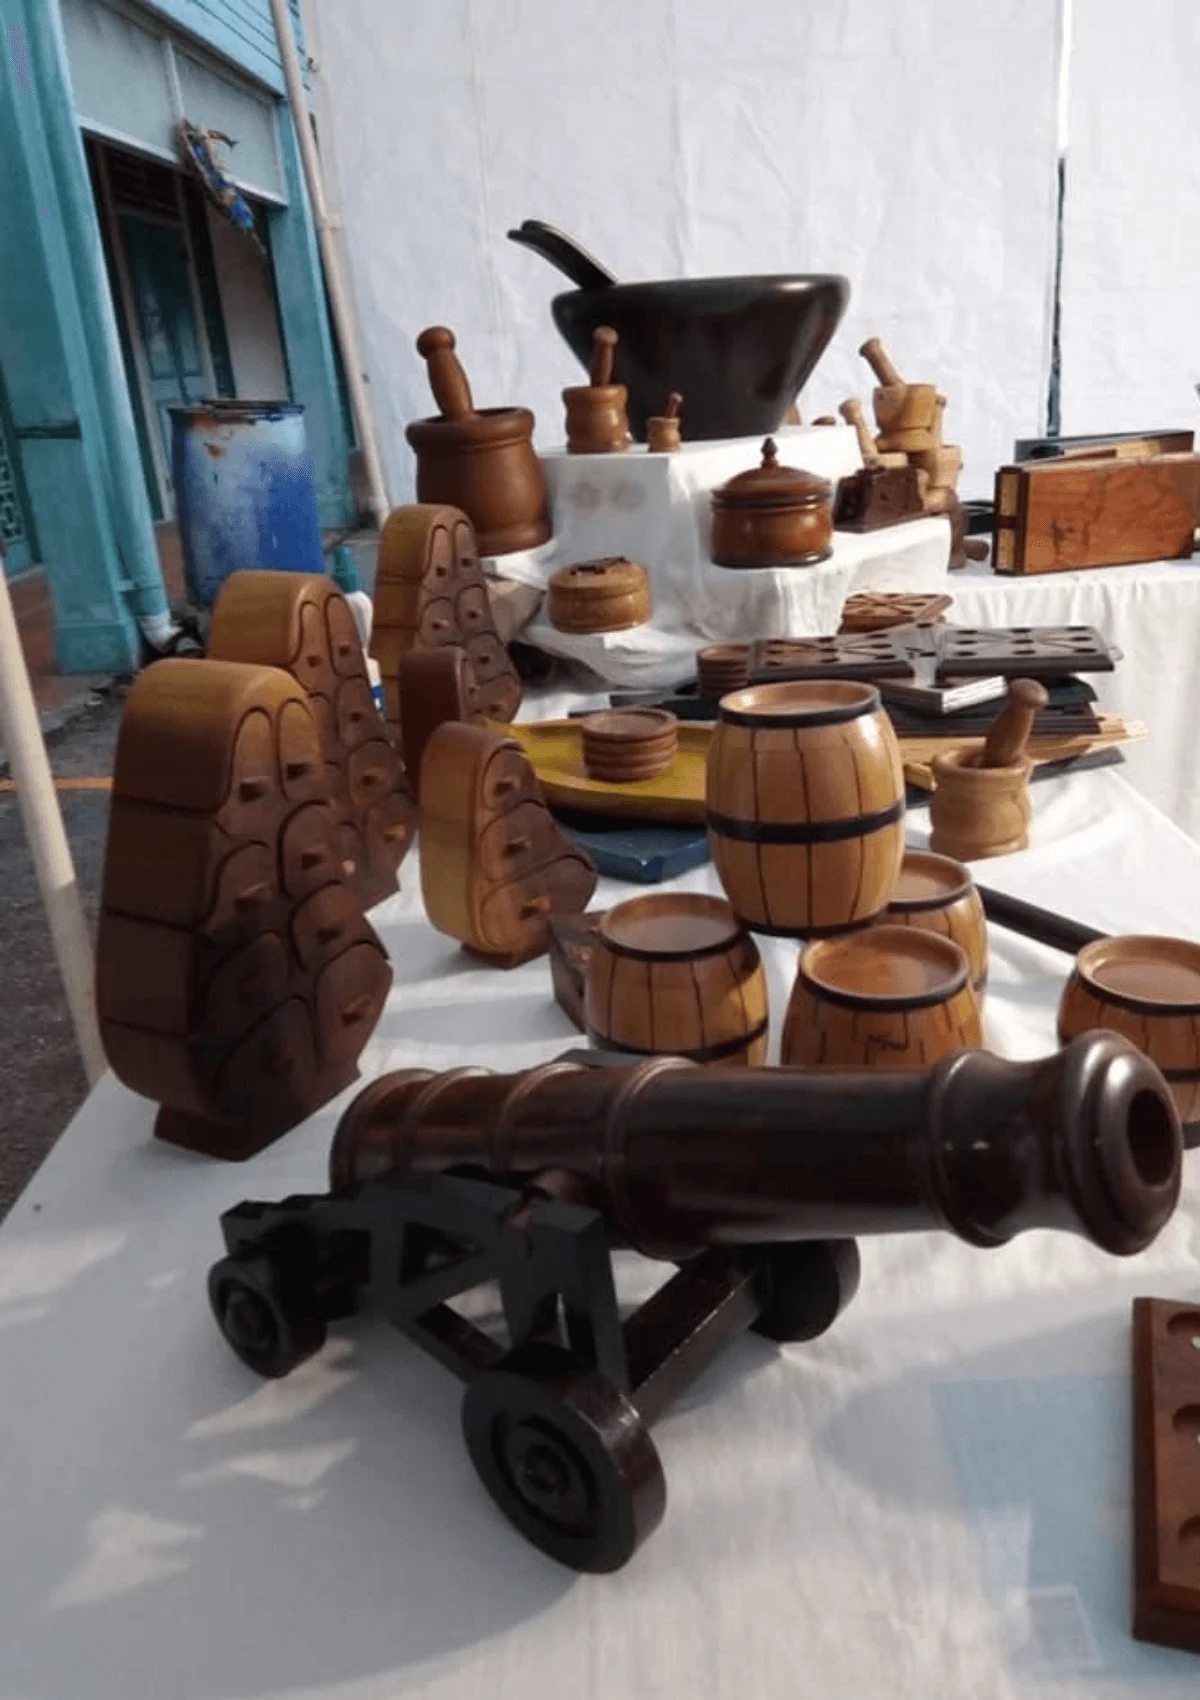 some of the best souvenirs from Barbados are made from Mahogany